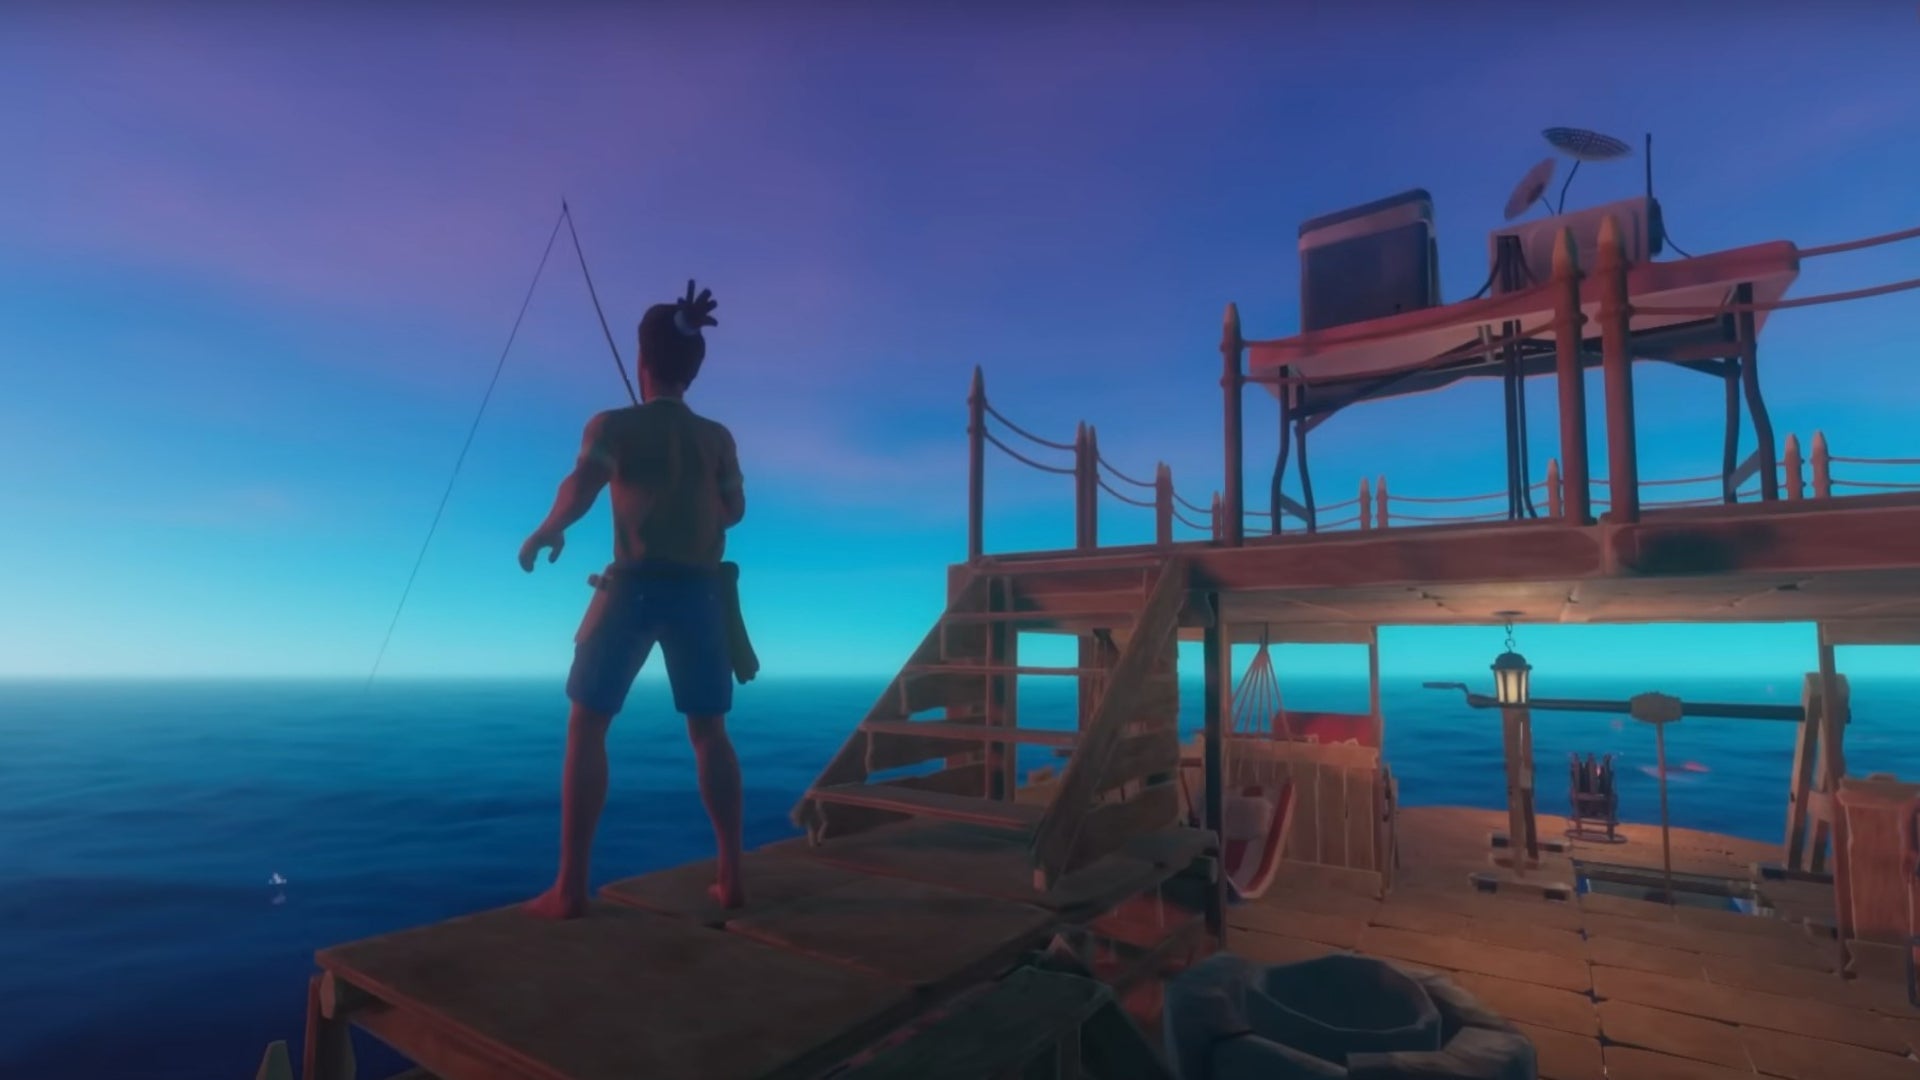 A character can be seen fishing off the edge of their raft at sunset in Raft.